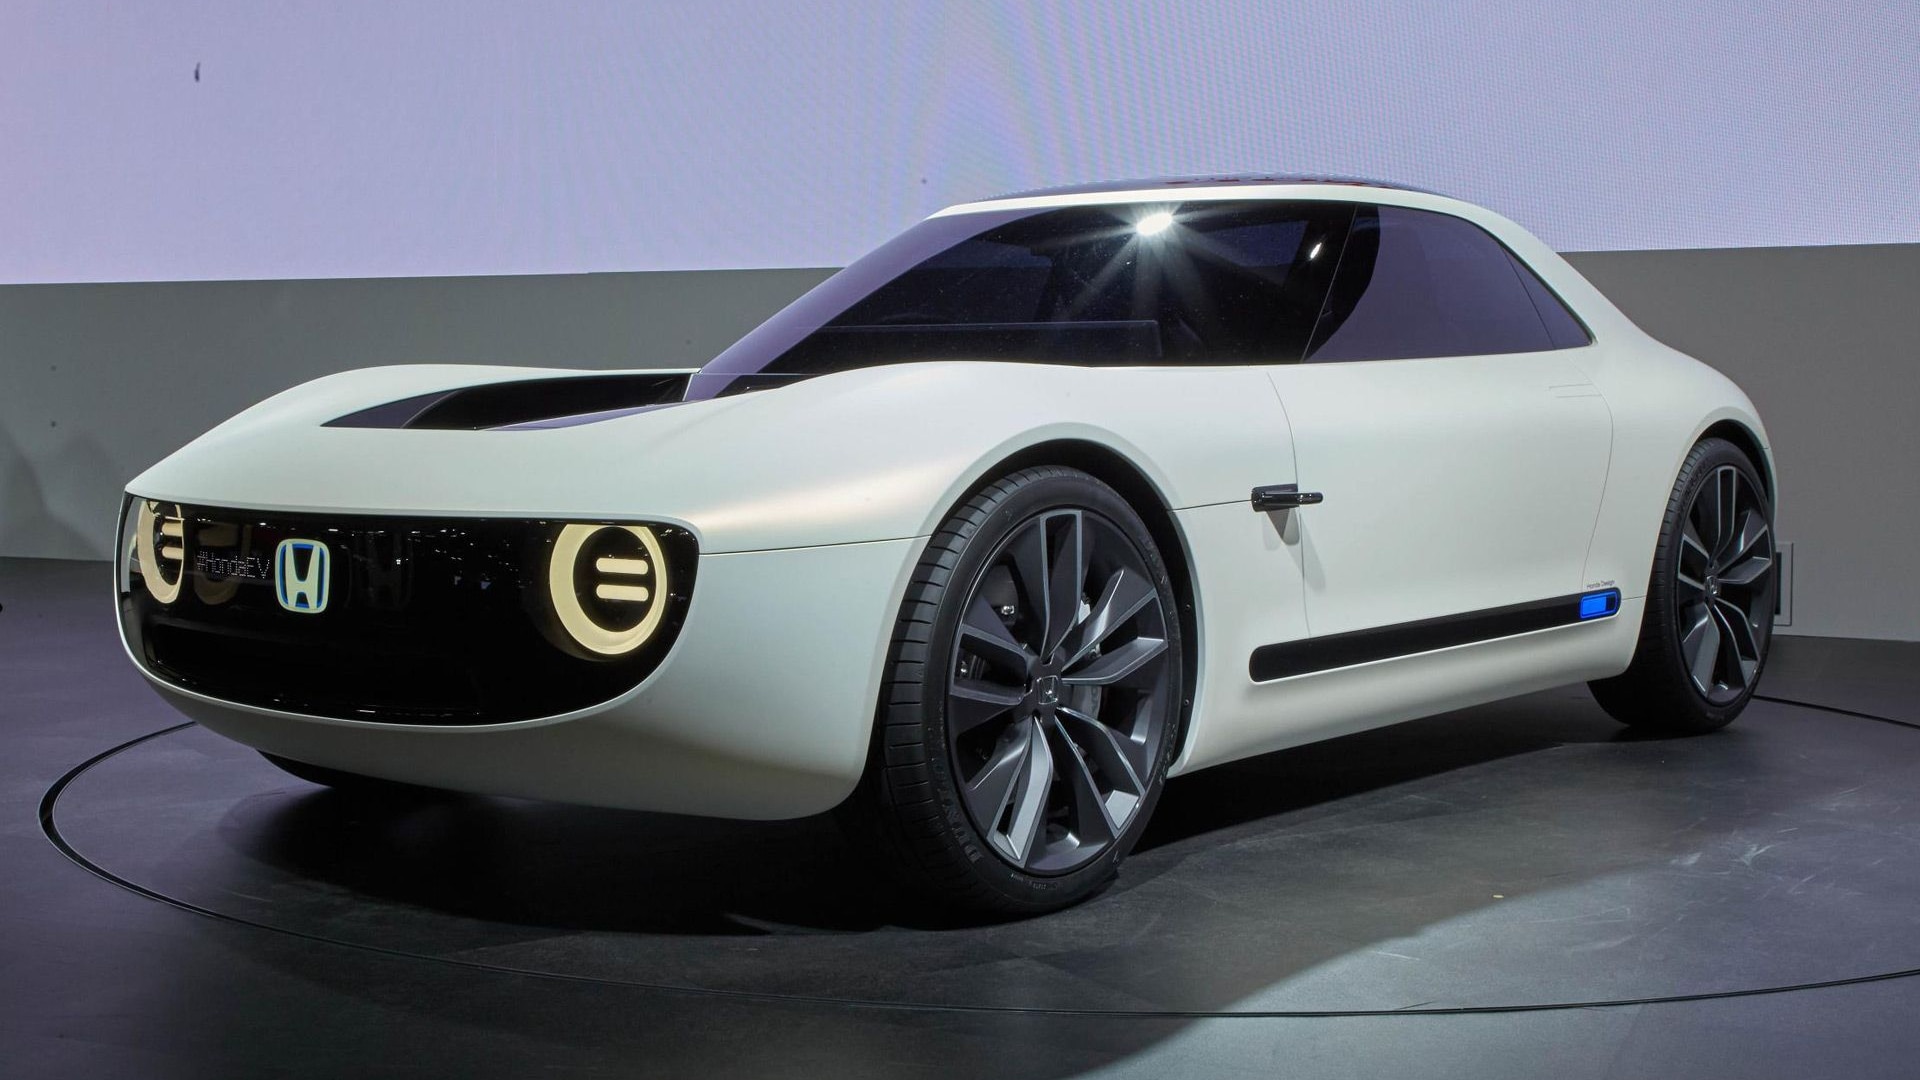 Honda Future Cars Honda Suv Econcept Is An Enticing Preview Of The